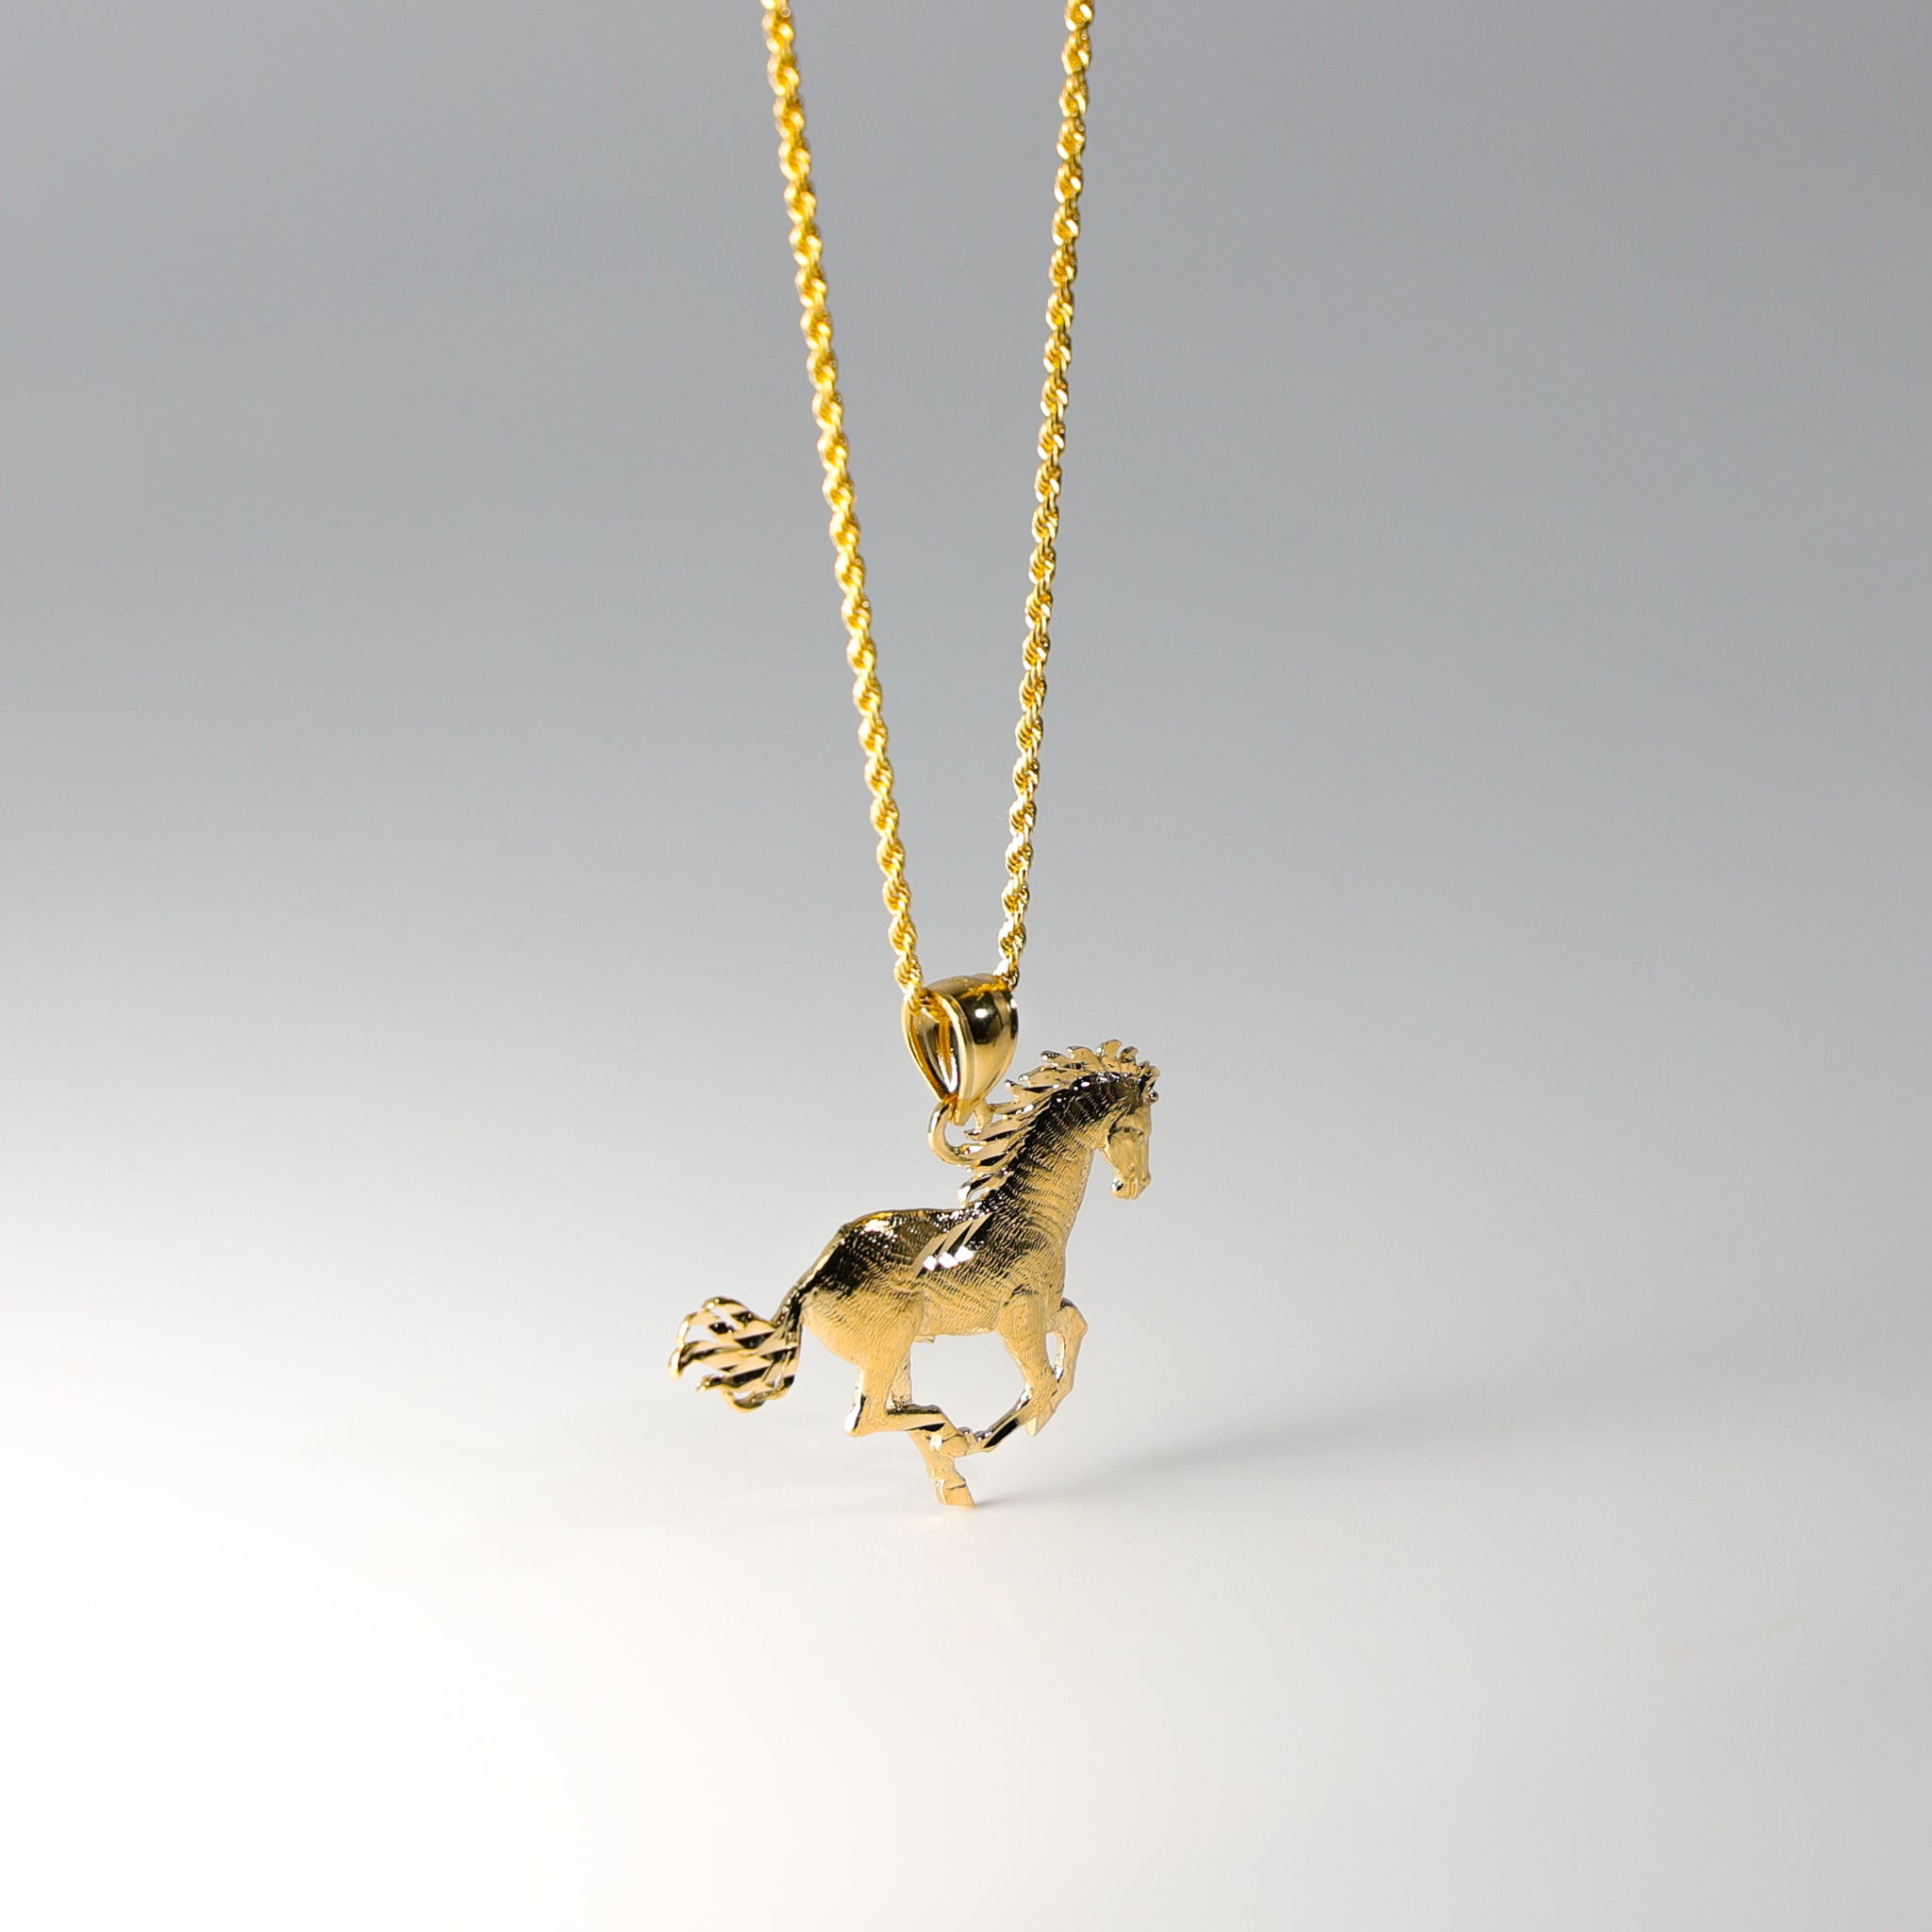 Gold Horse Pendant Model-2347 - Charlie & Co. Jewelry